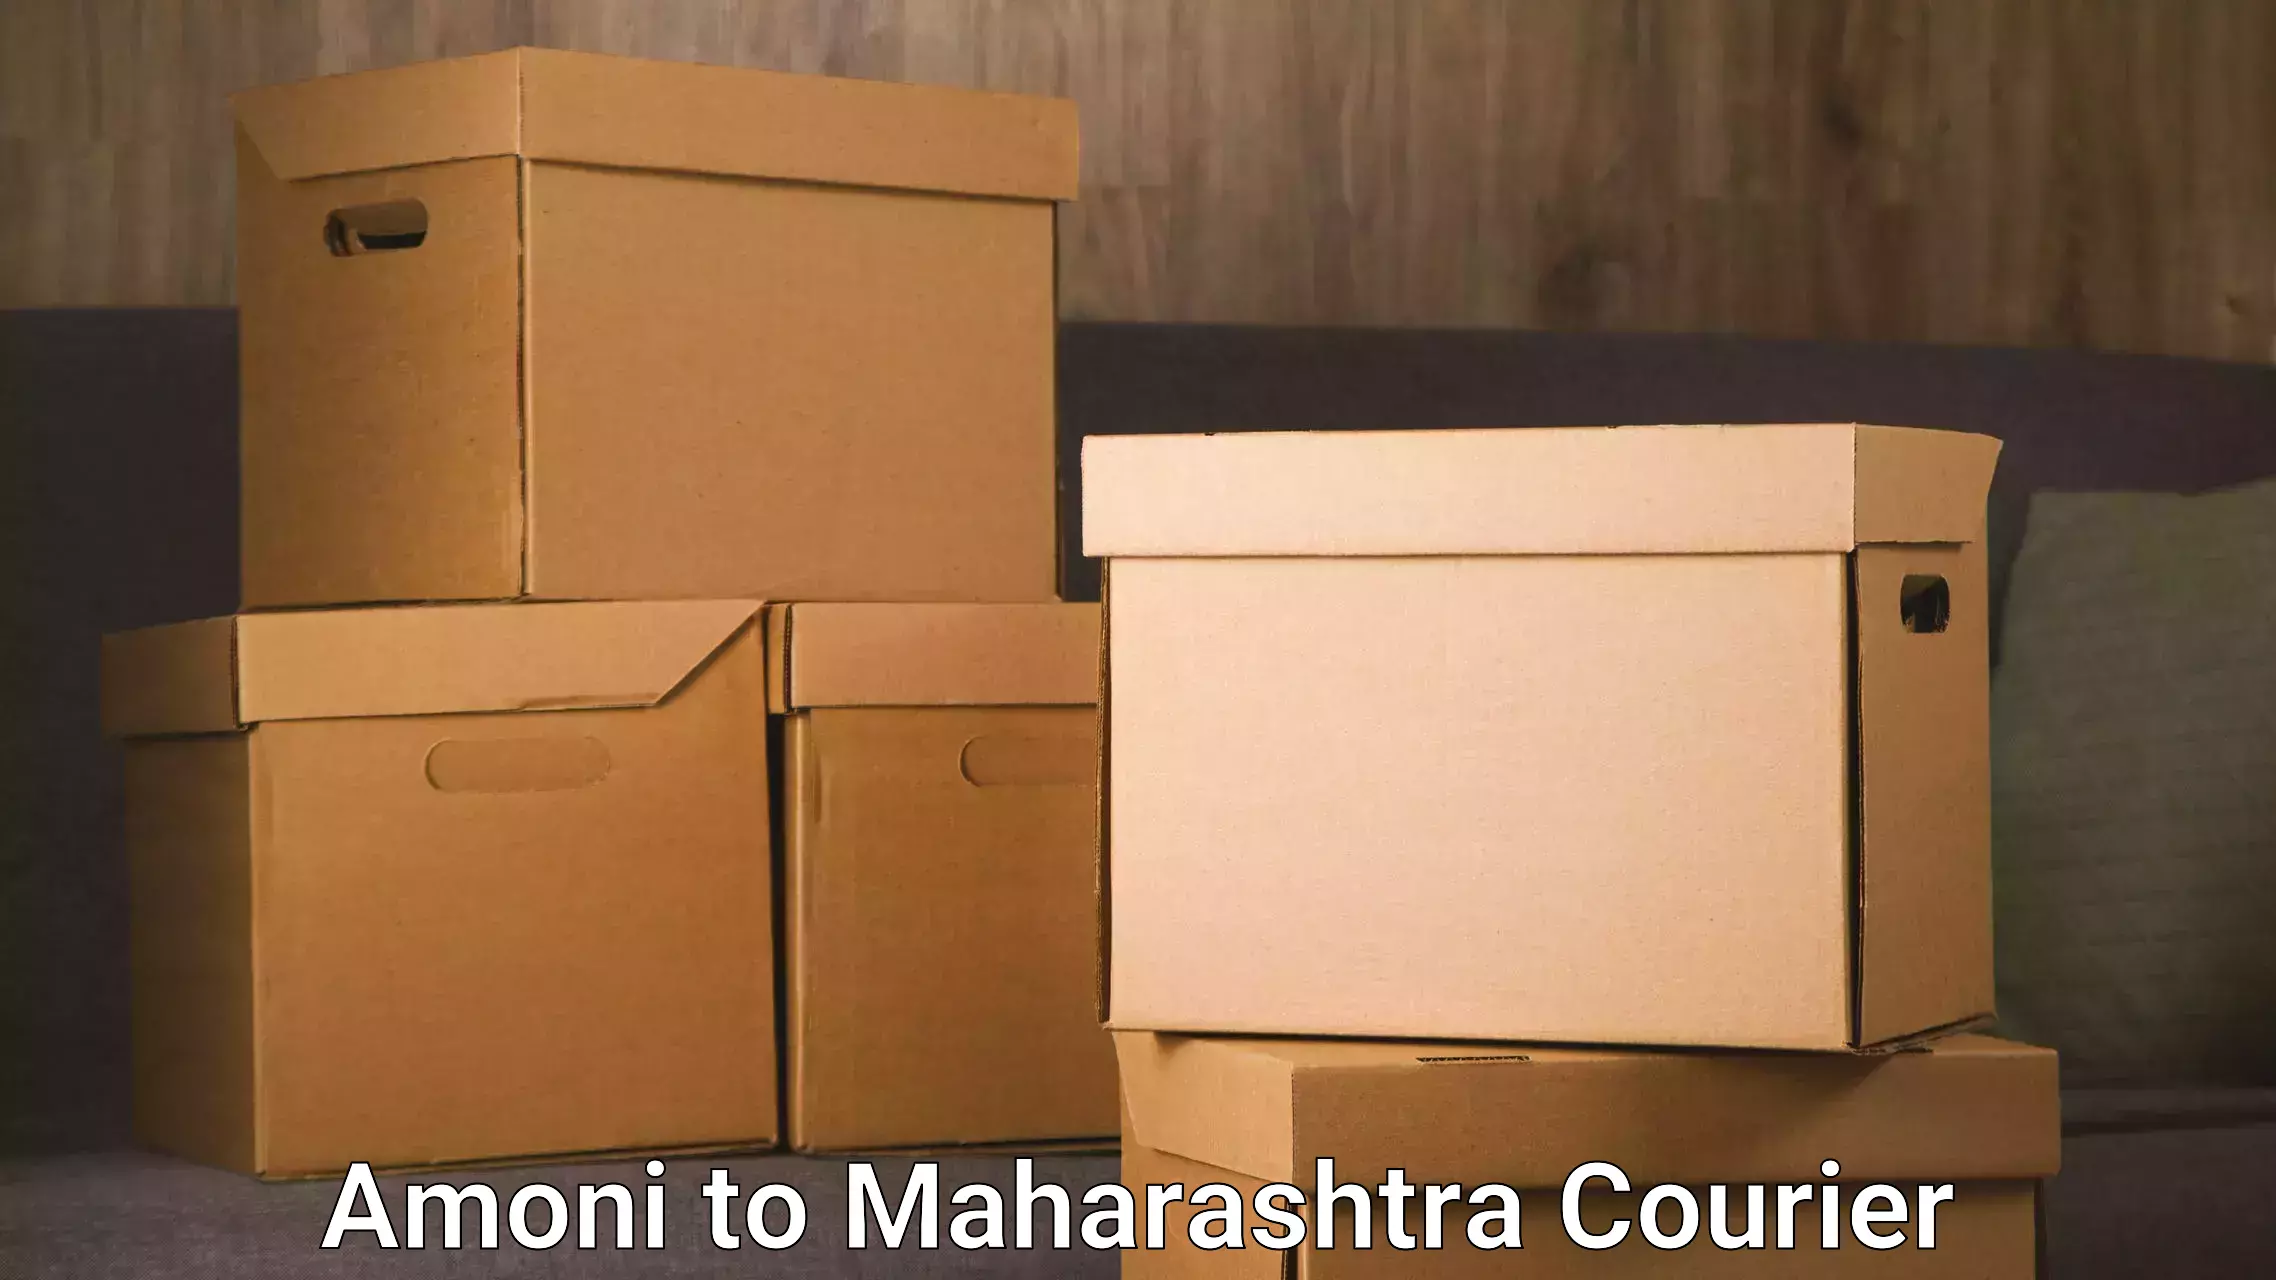 Easy access courier services Amoni to Bhiwandi